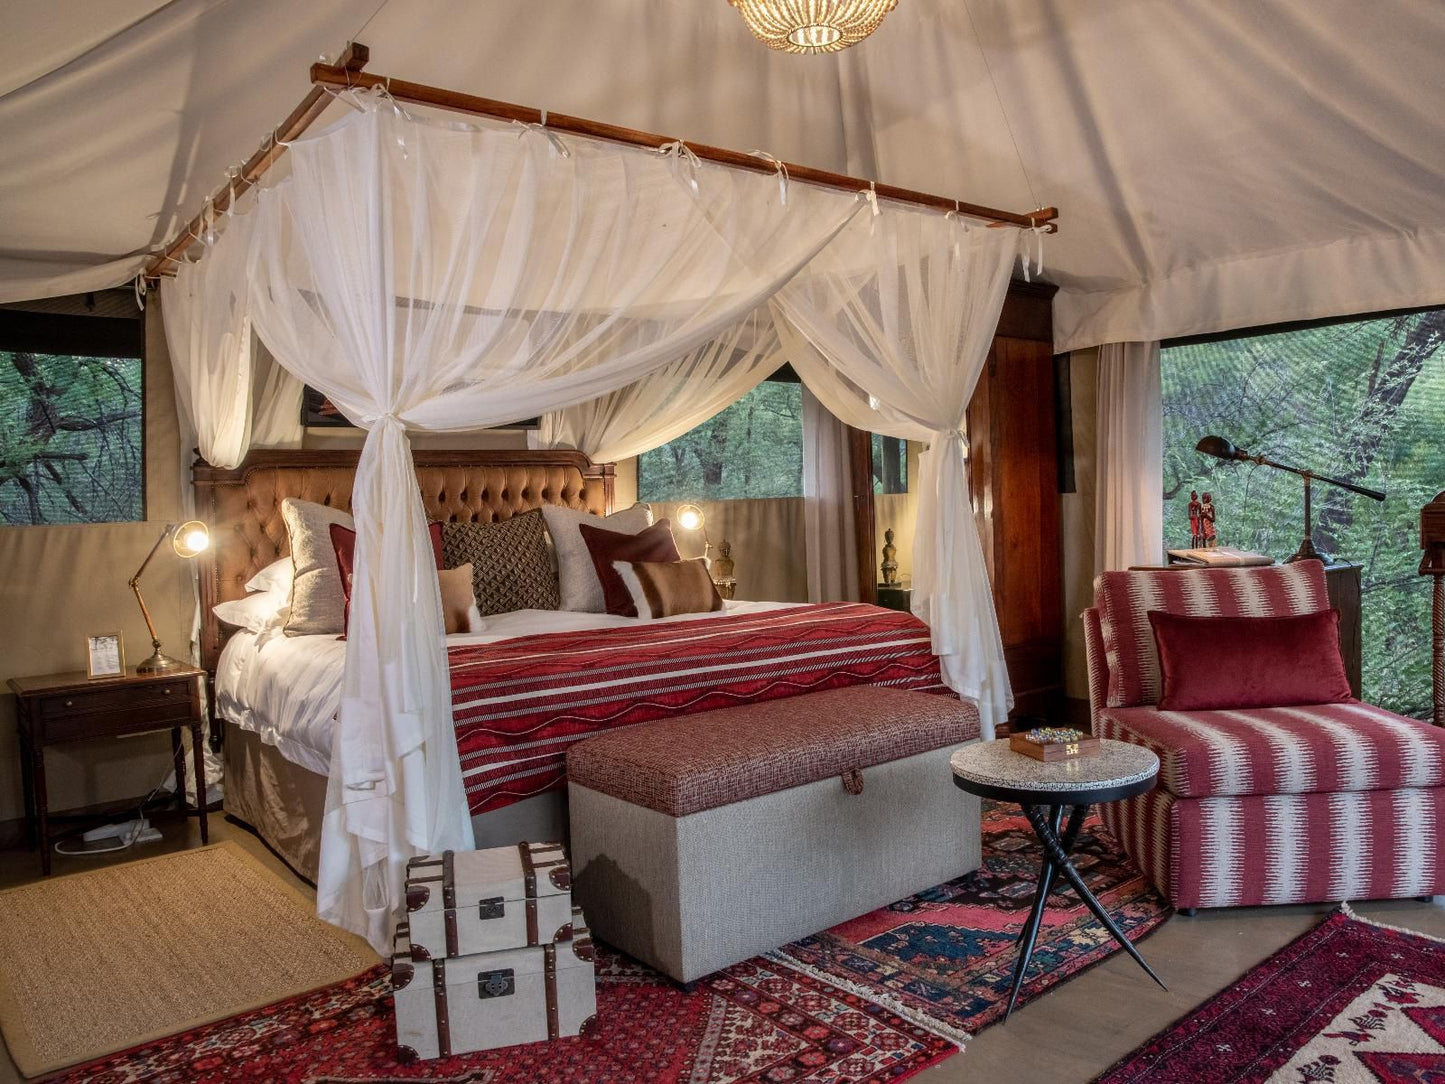 Tintswalo Lapalala Waterberg Limpopo Province South Africa Tent, Architecture, Bedroom